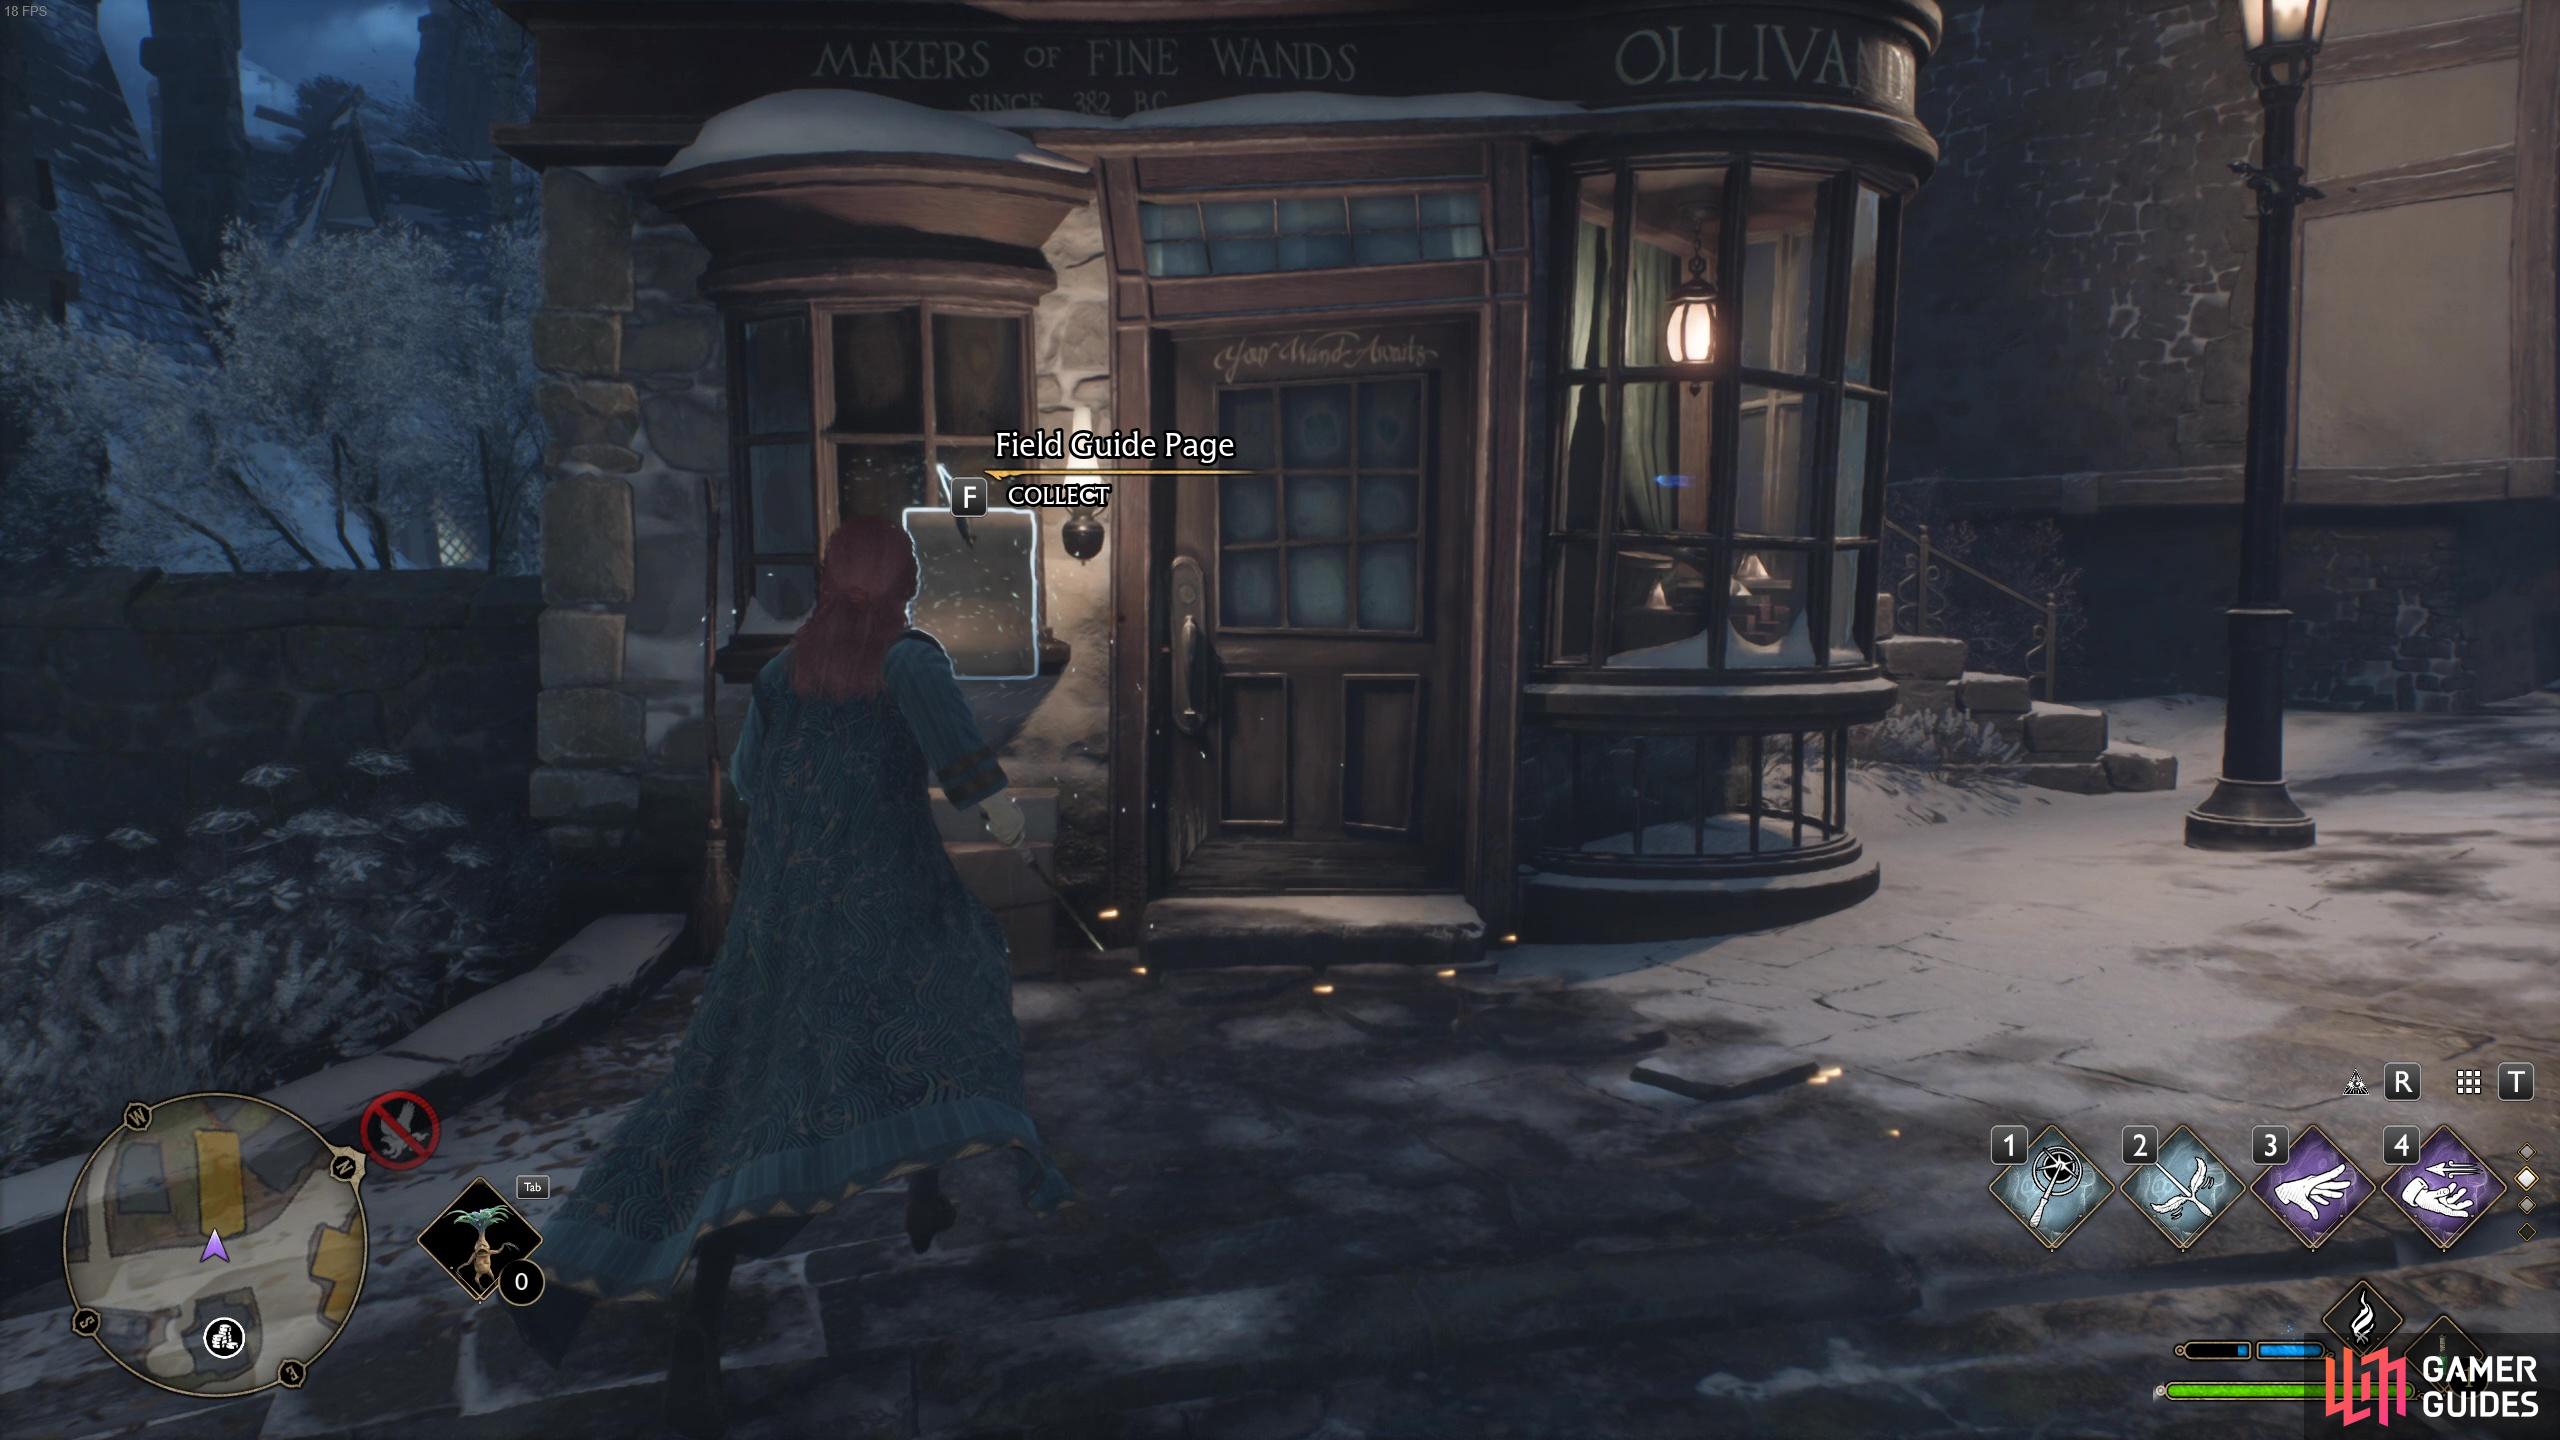 A field guide page can be found outside Ollivander's Wand Shop. 